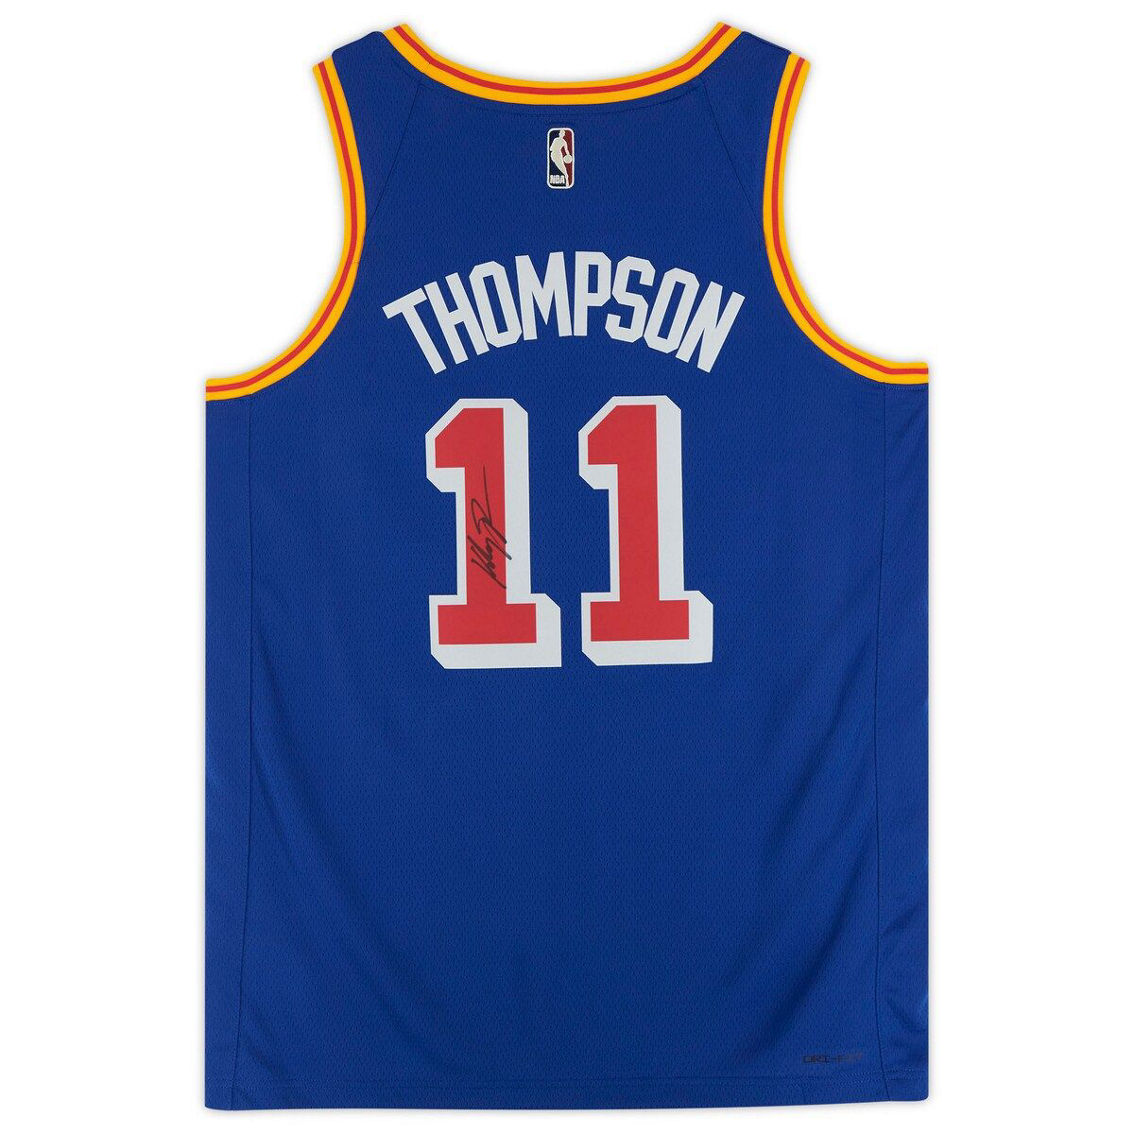 Fanatics Authentic Klay Thompson Royal Golden State Warriors Autographed 2021/22 Year 0 Swingman Jersey - Image 3 of 4